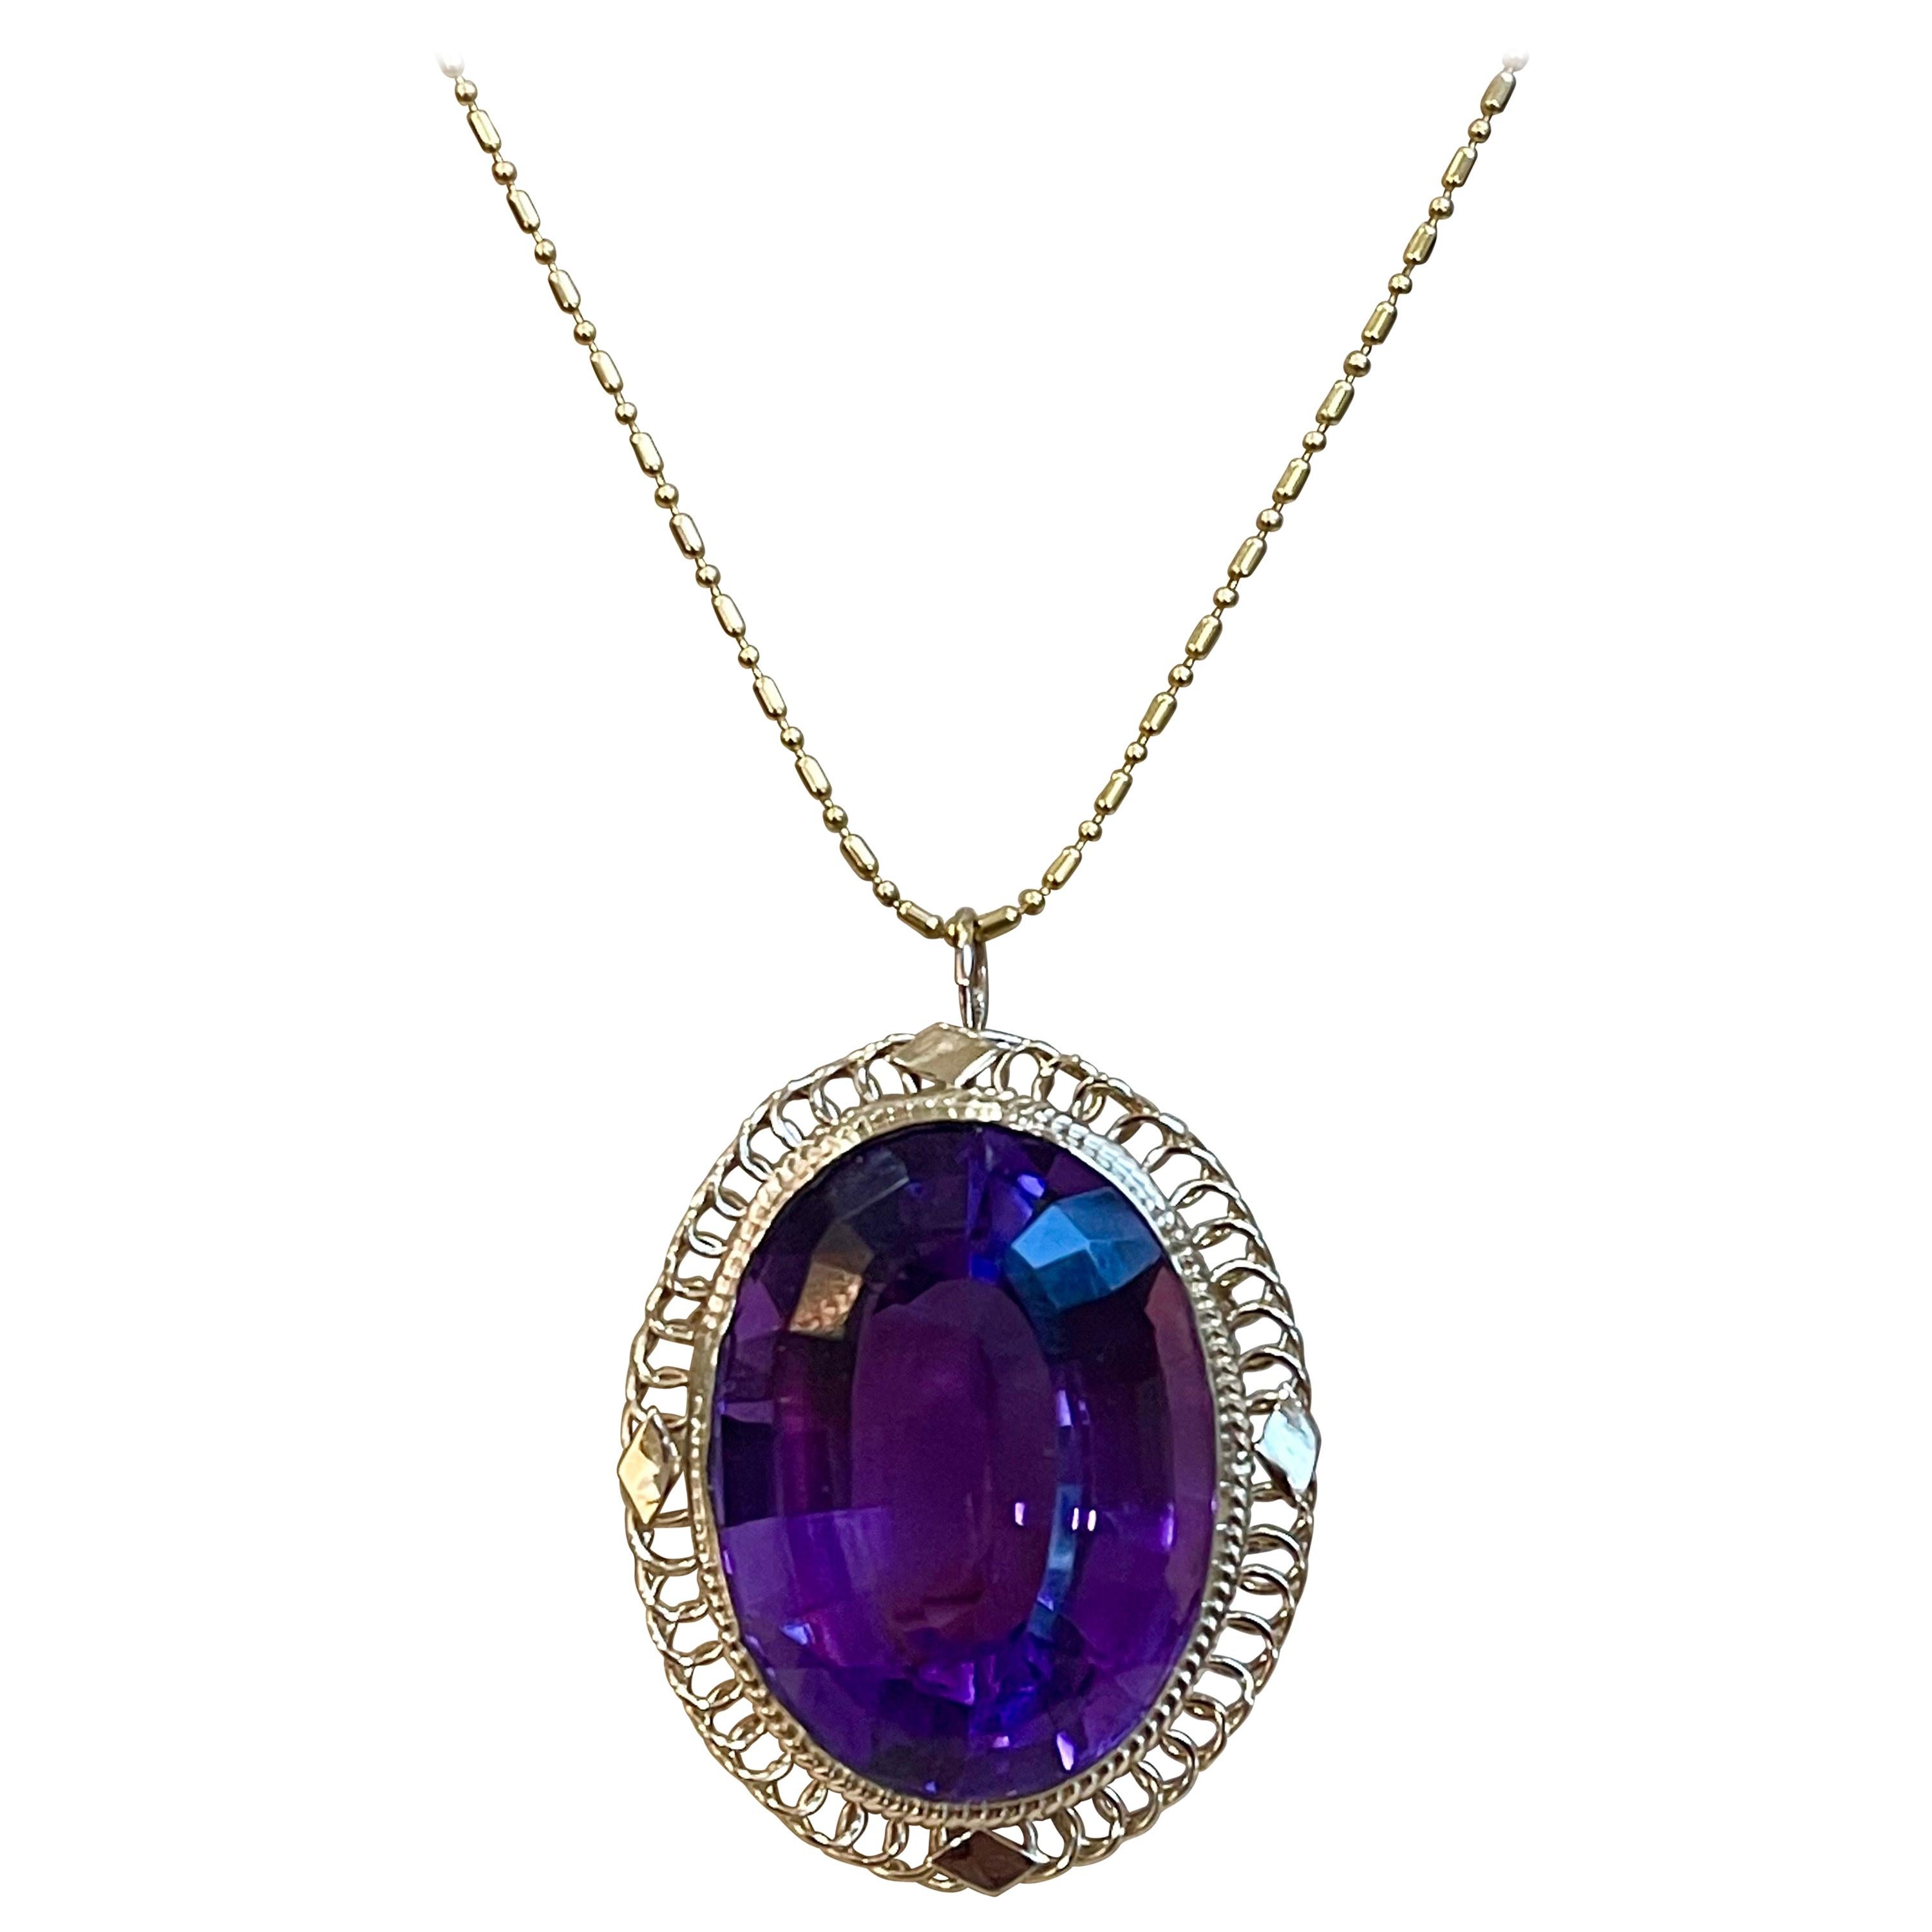  Approximately  23 Carat Amethyst Pendant  Chain Necklace  14 Karat Yellow Gold  Vintage

This spectacular Pendant Necklace  consisting of a single large Oval Cut Amethyst , approximately  23 Carat.  The  Amethyst   is surrounded by a intricate